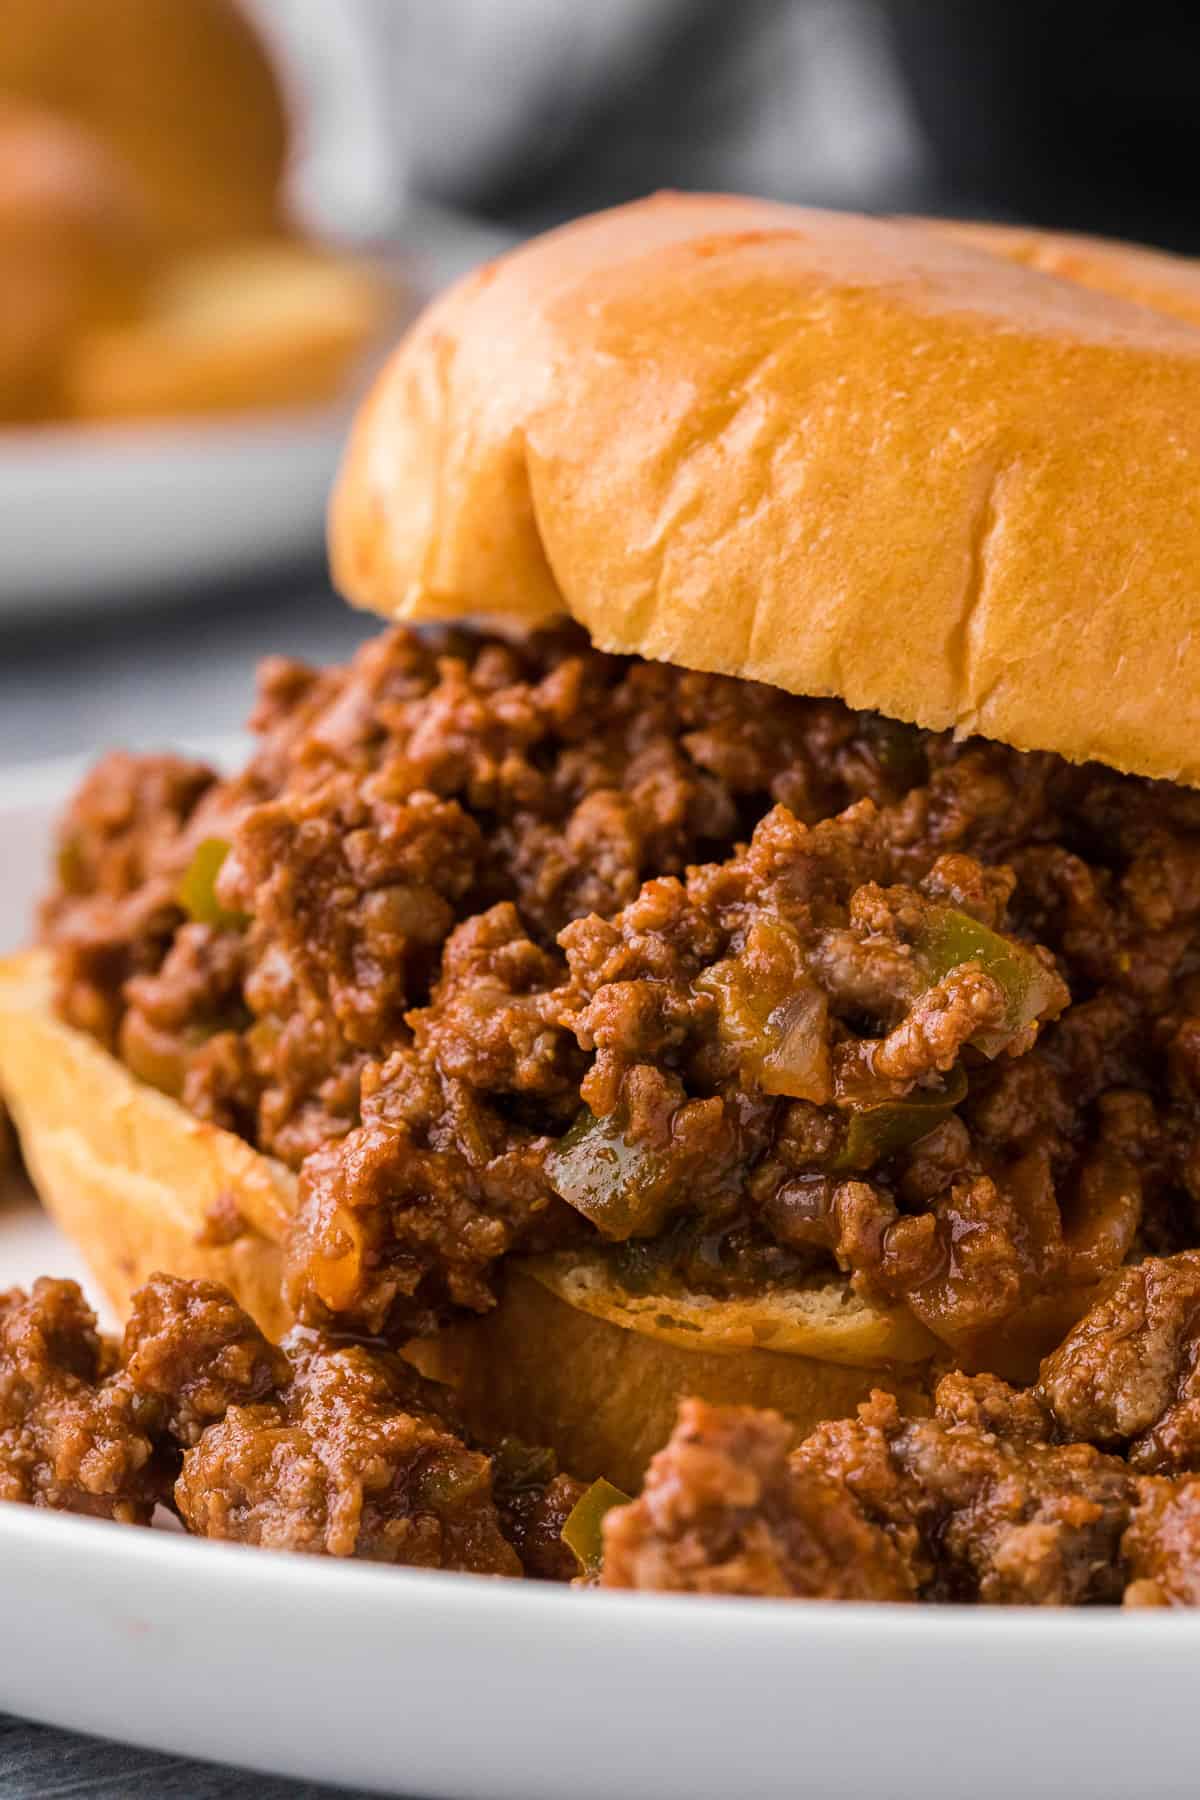 Homemade sloppy joes served on a bun with tater tots.